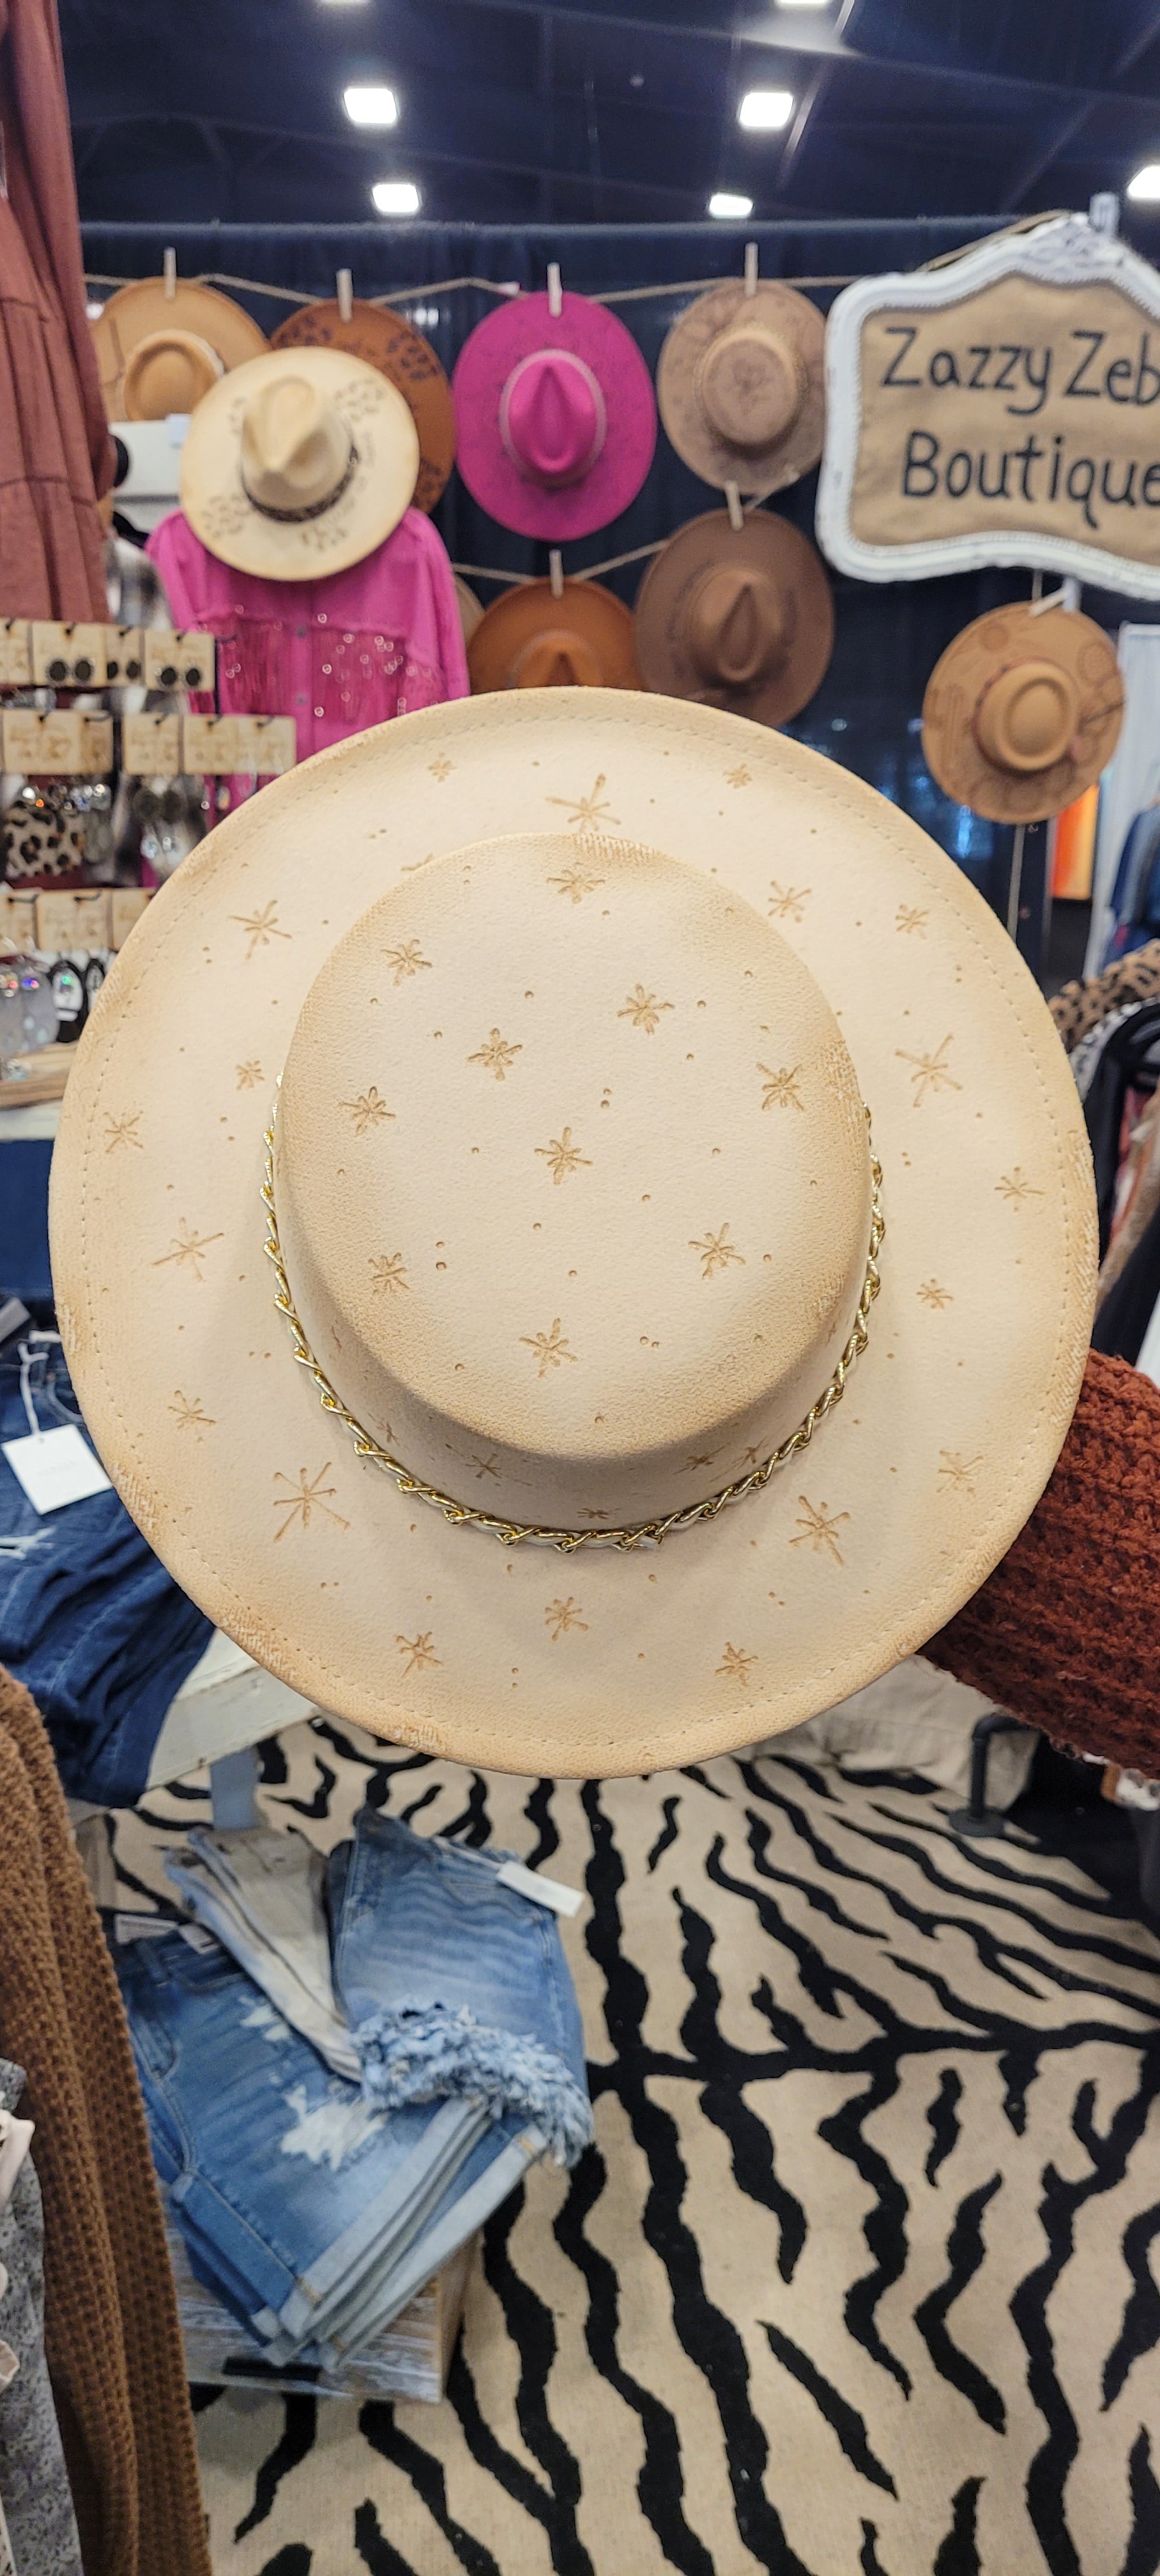 Features engraved stars Chain with a faux leather Felt hat Flat brim 100% polyester Ribbon drawstring for hat size adjustment Head Circumference: 24" Crown Height: 3.5" Brim Length: 13.5" Brim Width: 12.75" Branded & numbered inside crown Custom burned & engraved by Kayla